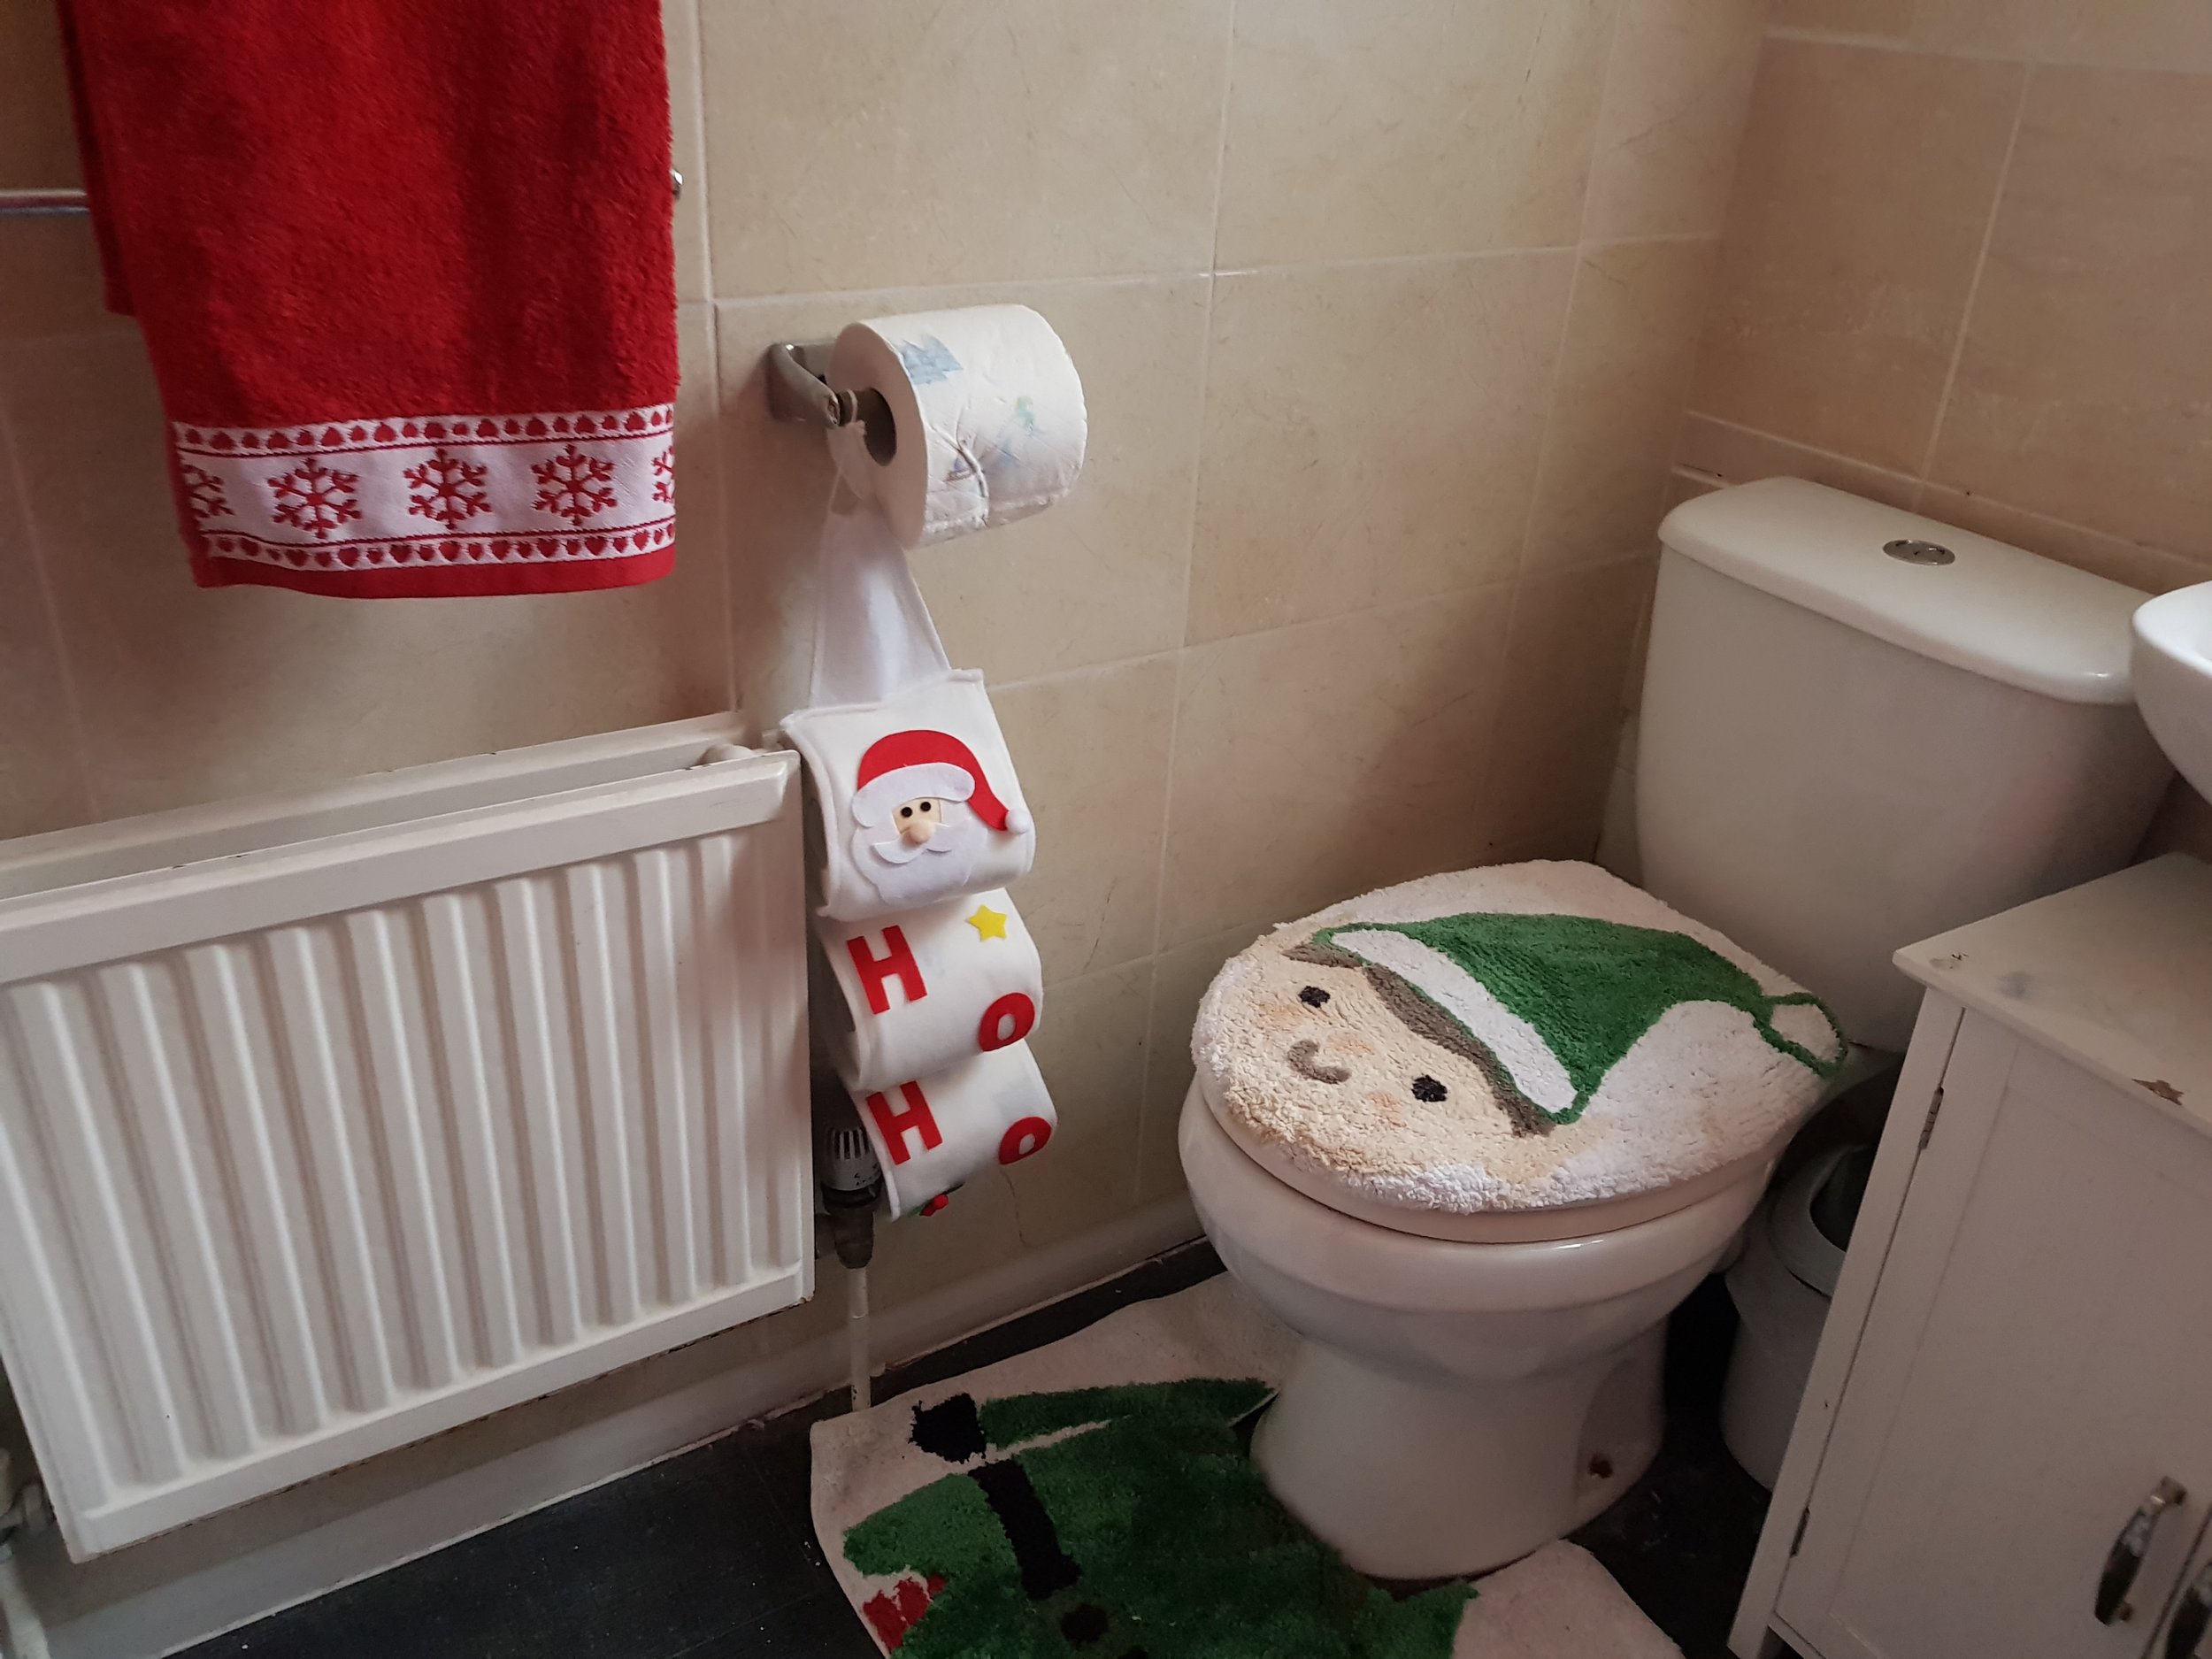 Christmas toilet cover, toilet rolls and towels